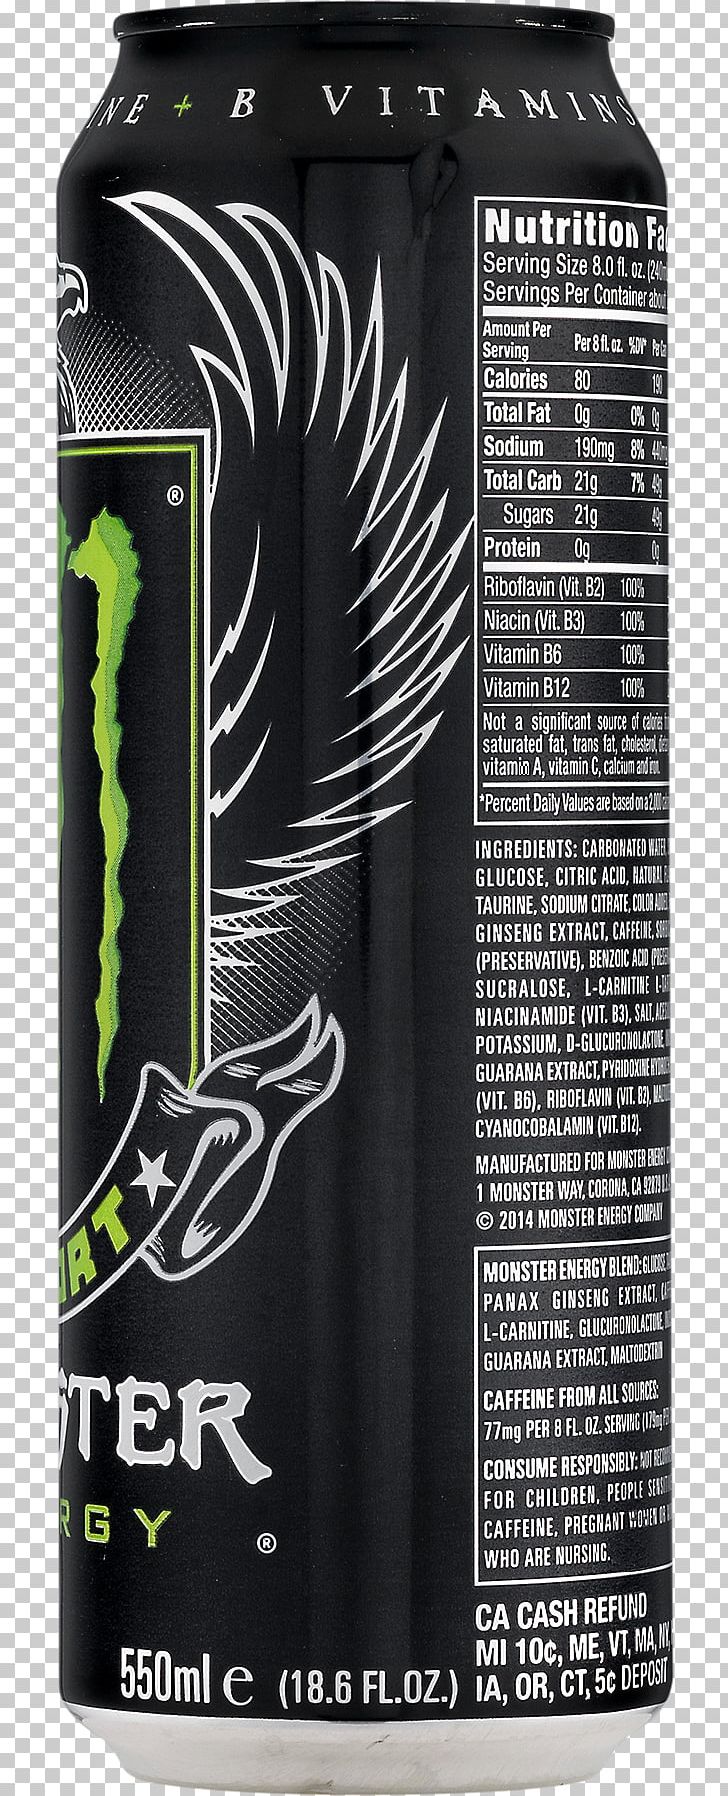 Energy Drink Monster Energy B Vitamins Taurine Levocarnitine PNG, Clipart, Brand, B Vitamins, Carnitine, Com, Drink Free PNG Download